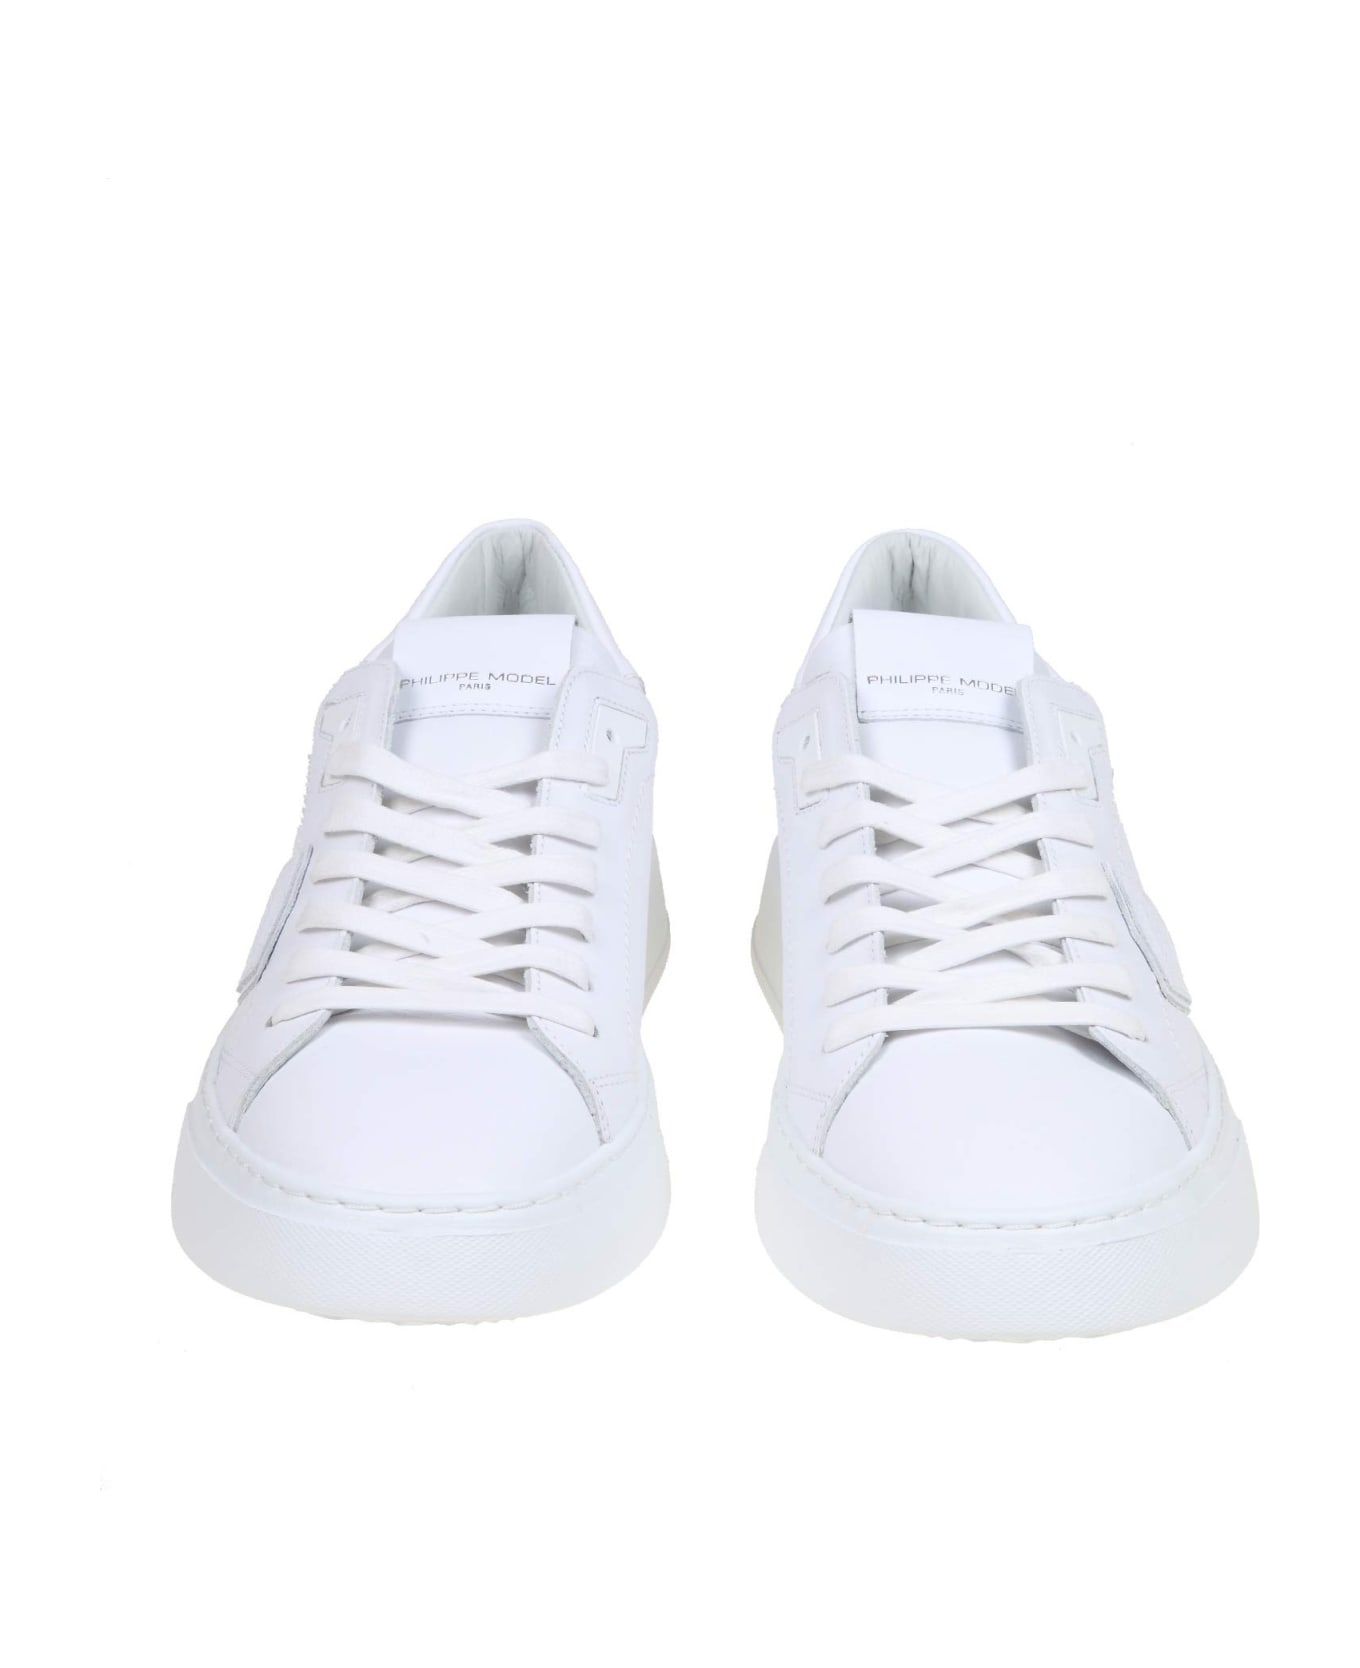 Philippe Model Temple Sneakers In White Leather - WHITE スニーカー